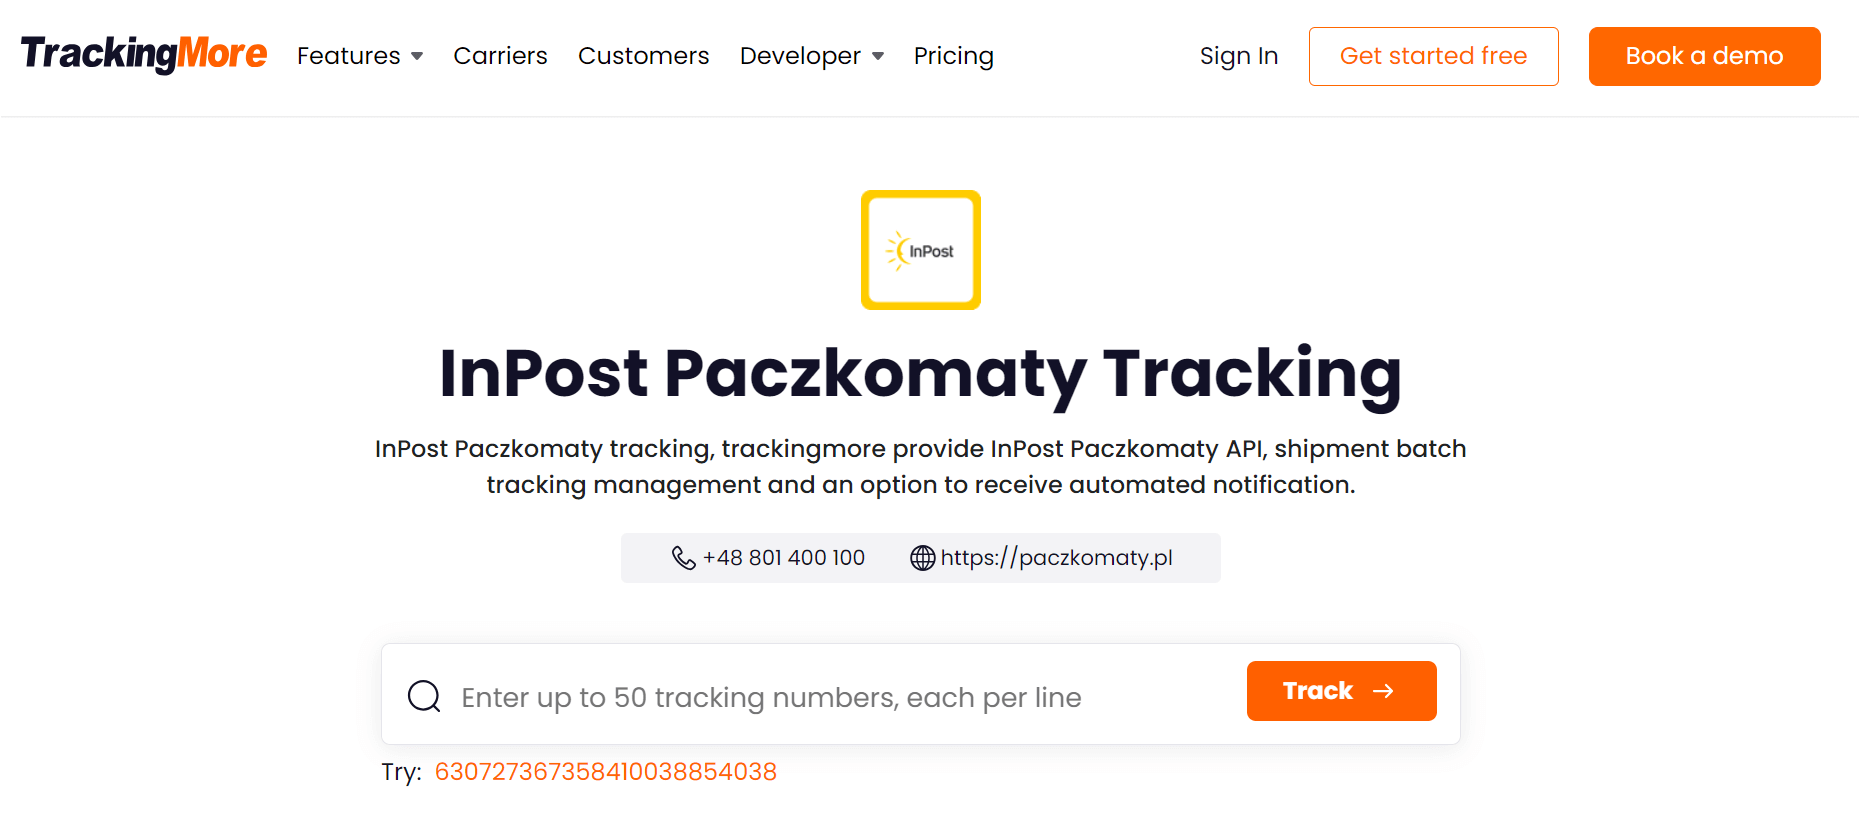 TrackingMore Inpost tracking page